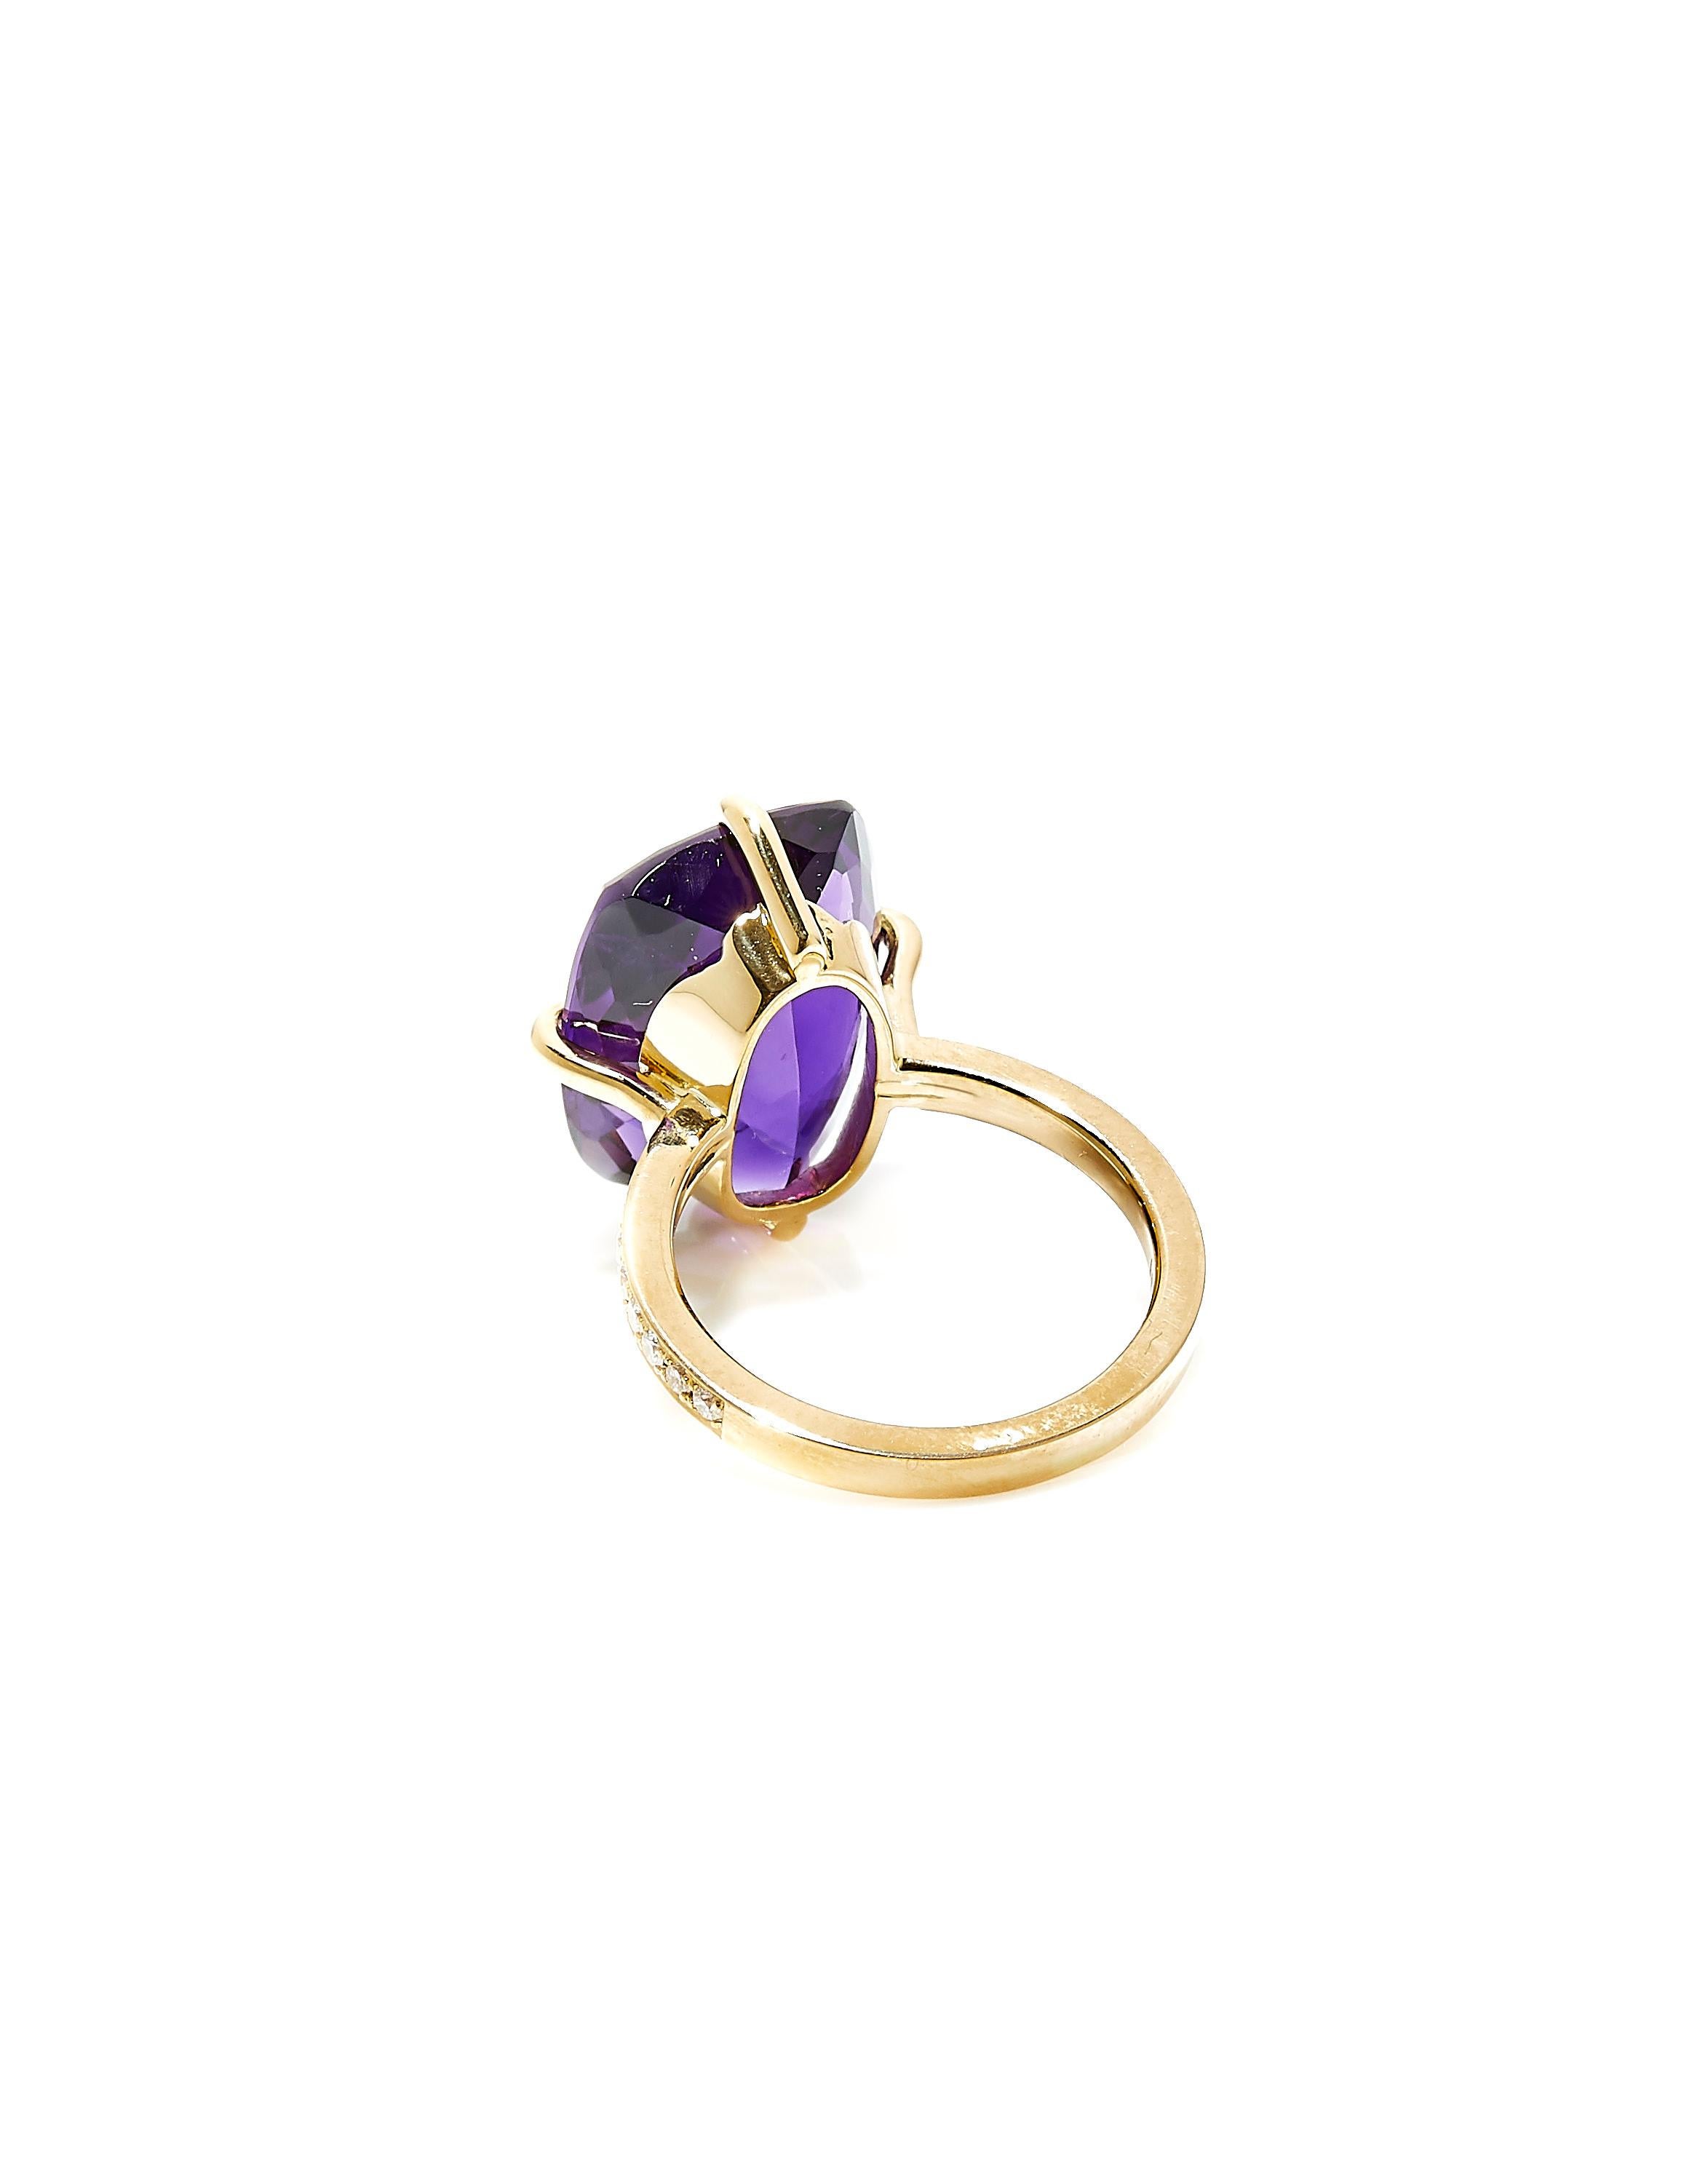 Cushion Cut 18 Karat Yellow Gold Engagement Ring with Amethyst & Diamonds, On Made To Order For Sale